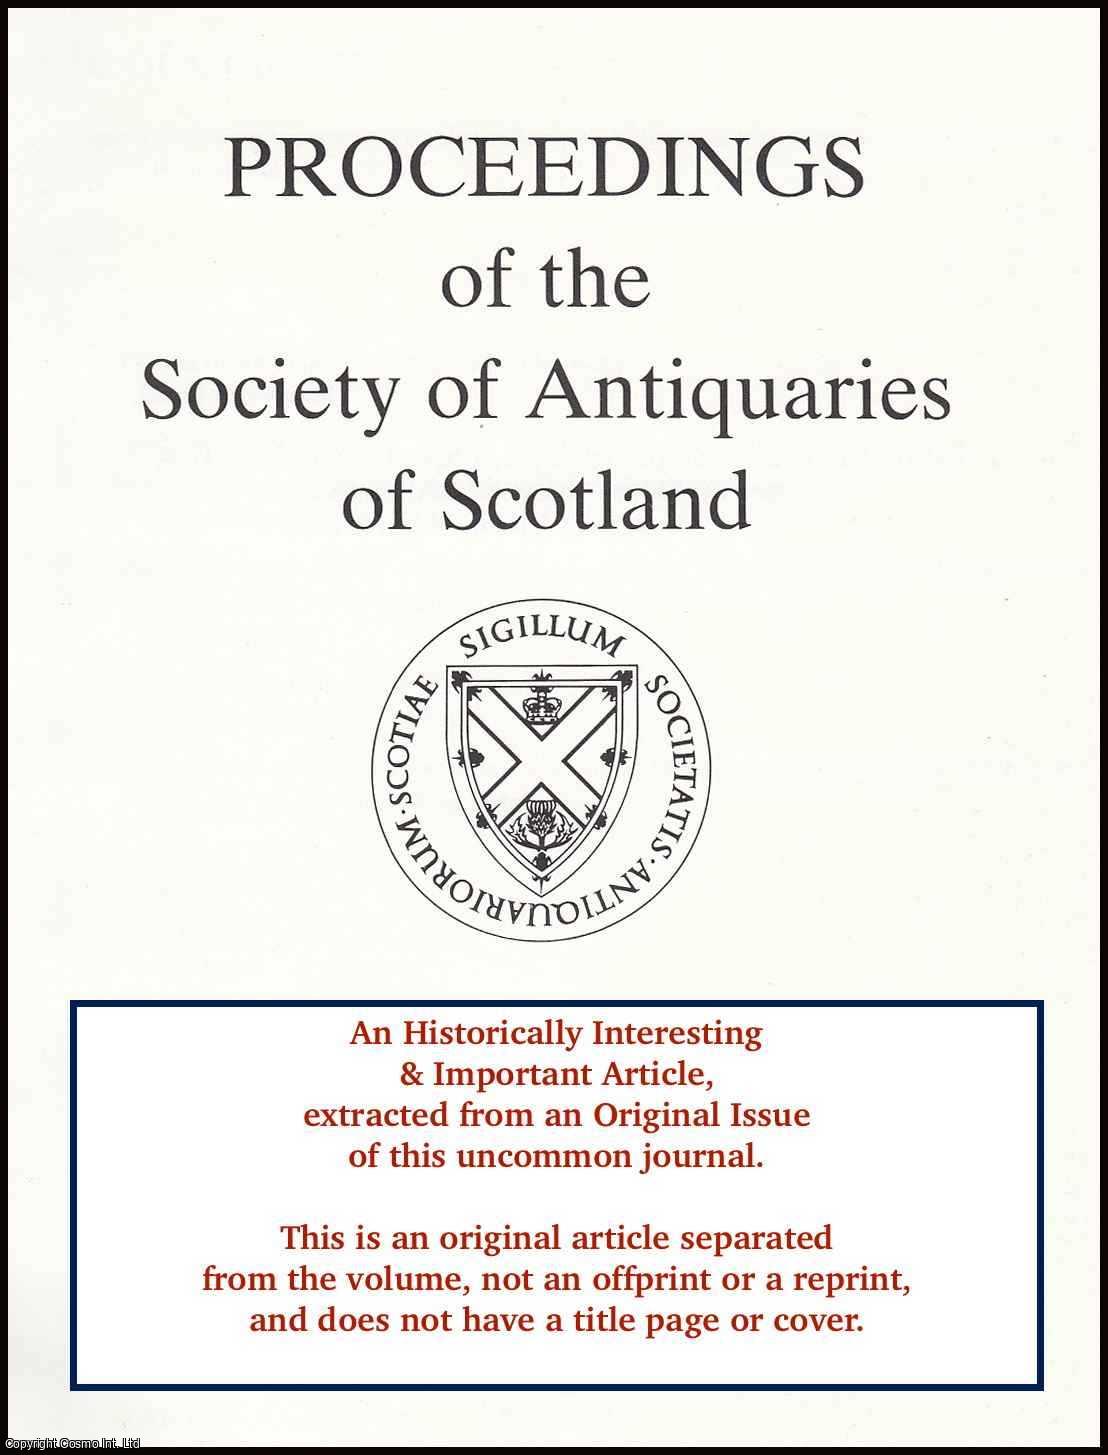 David G. Adams - The Brechin Hammermen's Incorporation, 1600-1762, and Later Fine Metal Craftsmen to c. 1850. An original article from the Proceedings of the Society of Antiquaries of Scotland, 2000.